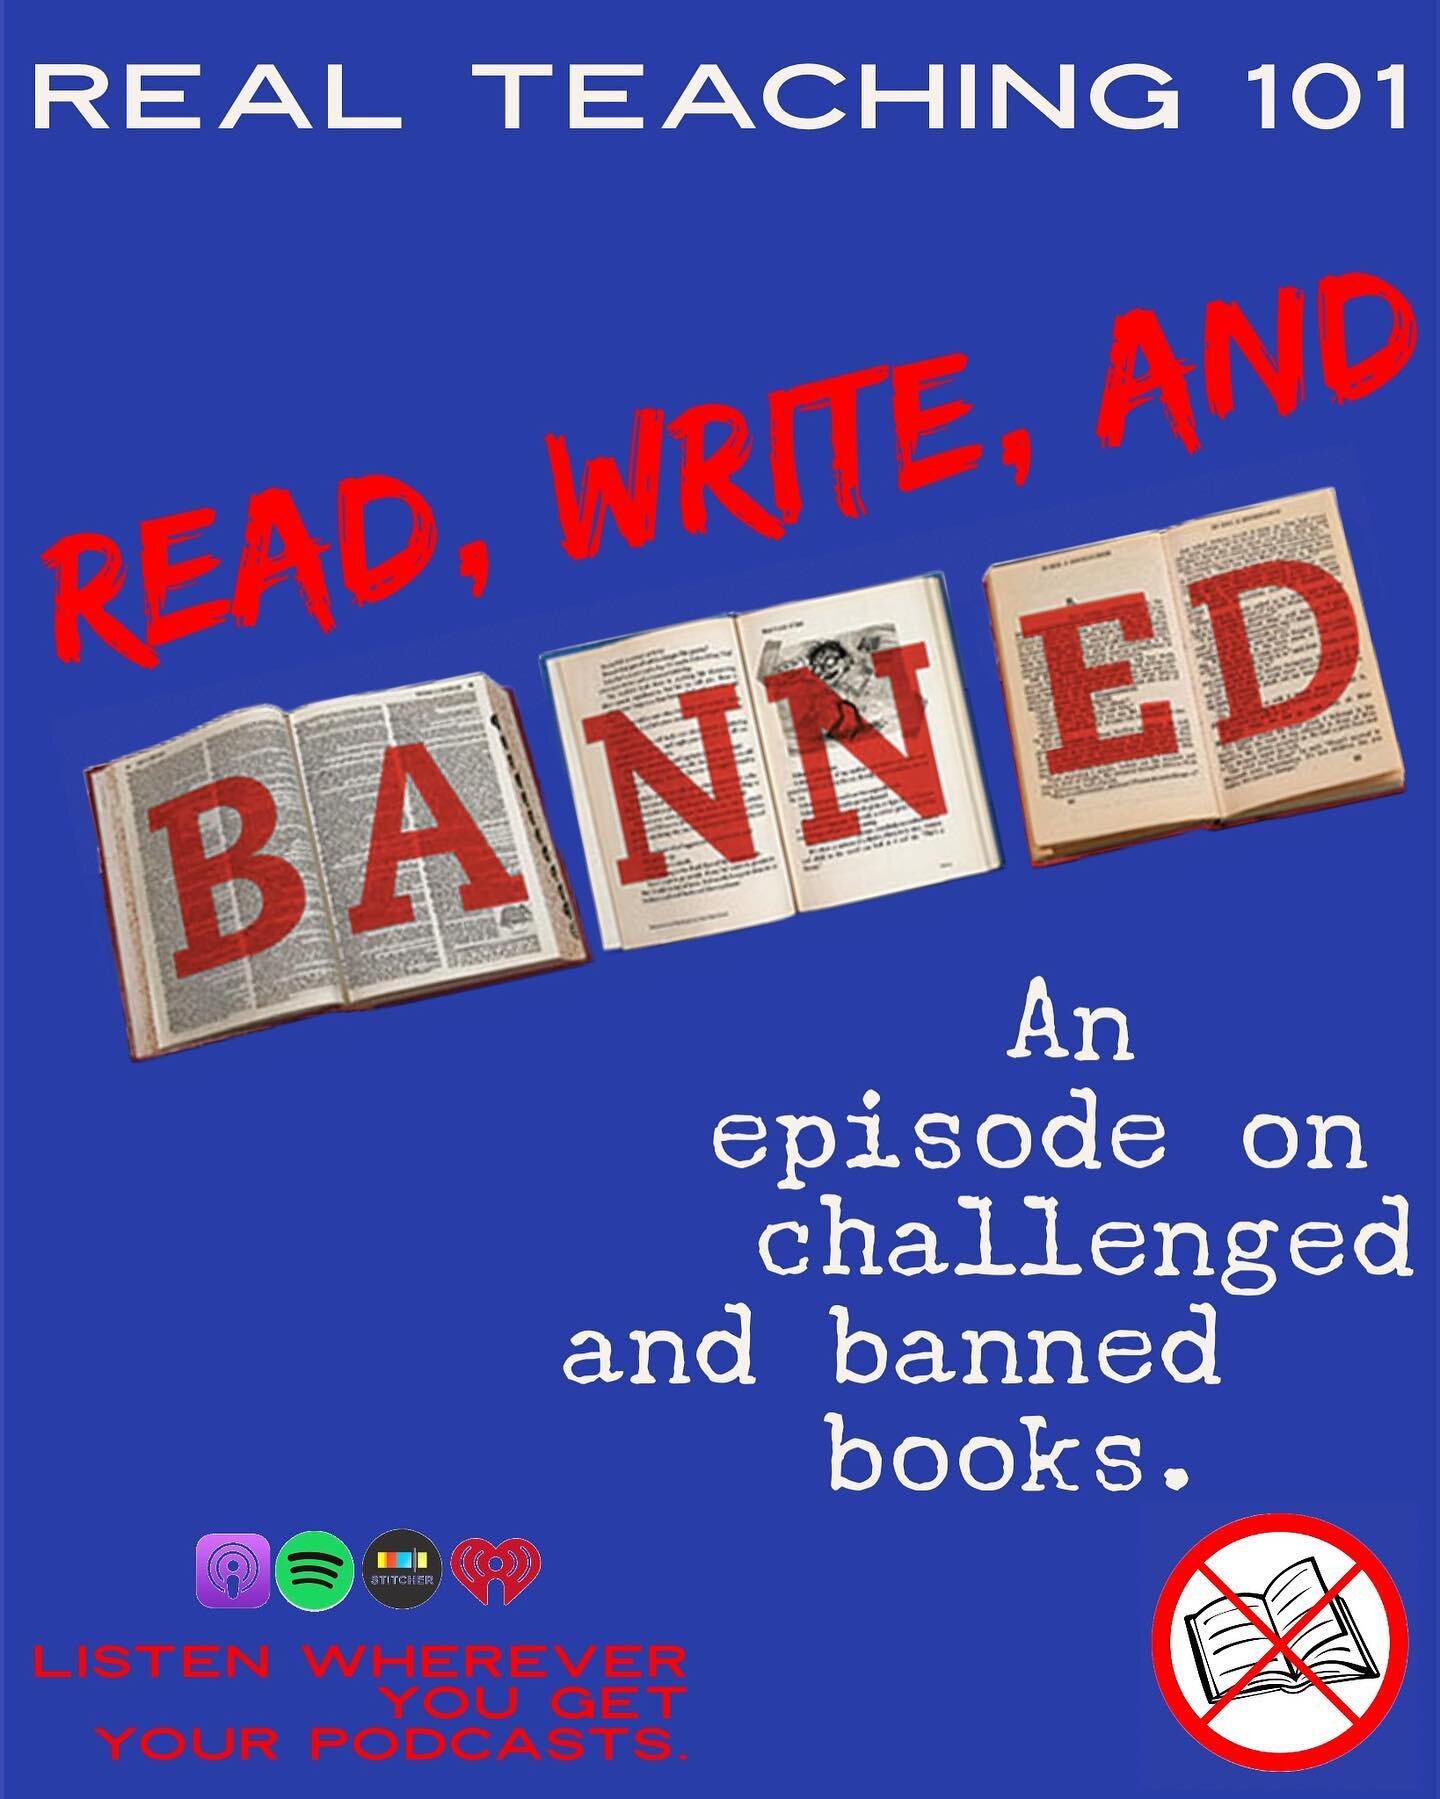 📚We like big books and we cannot lie! 

📚We're readers here at Ambitious Ed, which is why we are exploring the topic of challenged and banned books on this week's episode. 

📚Hear about the history of banning books, what is commonly challenged, an